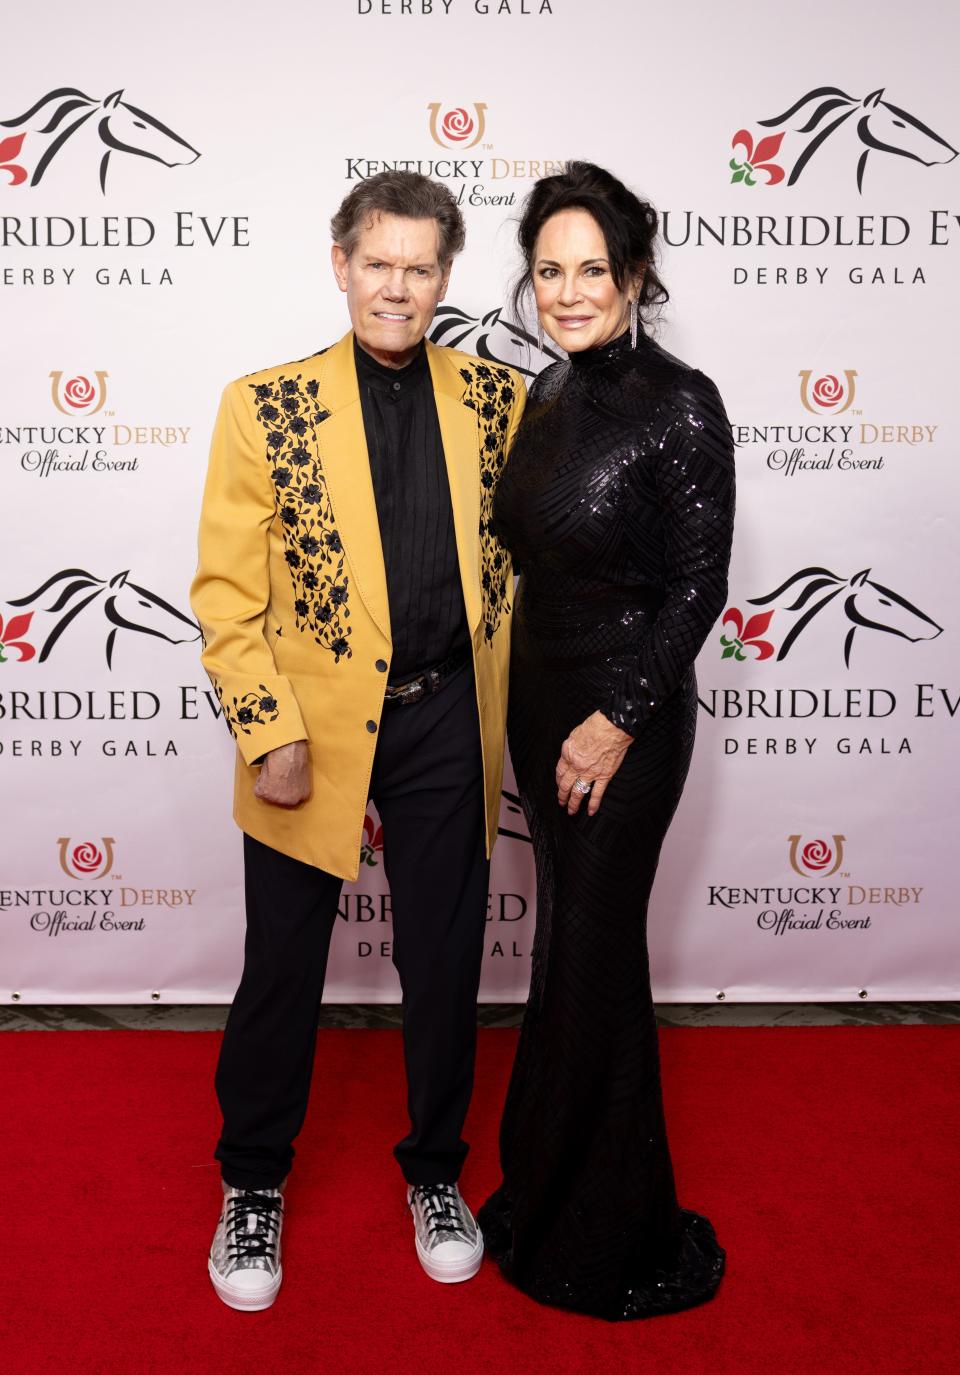 Randy Travis walks the red carpet at the Unbridled Eve Gala at the Galt House Hotel on May 3, 2024 in Louisville, KY.